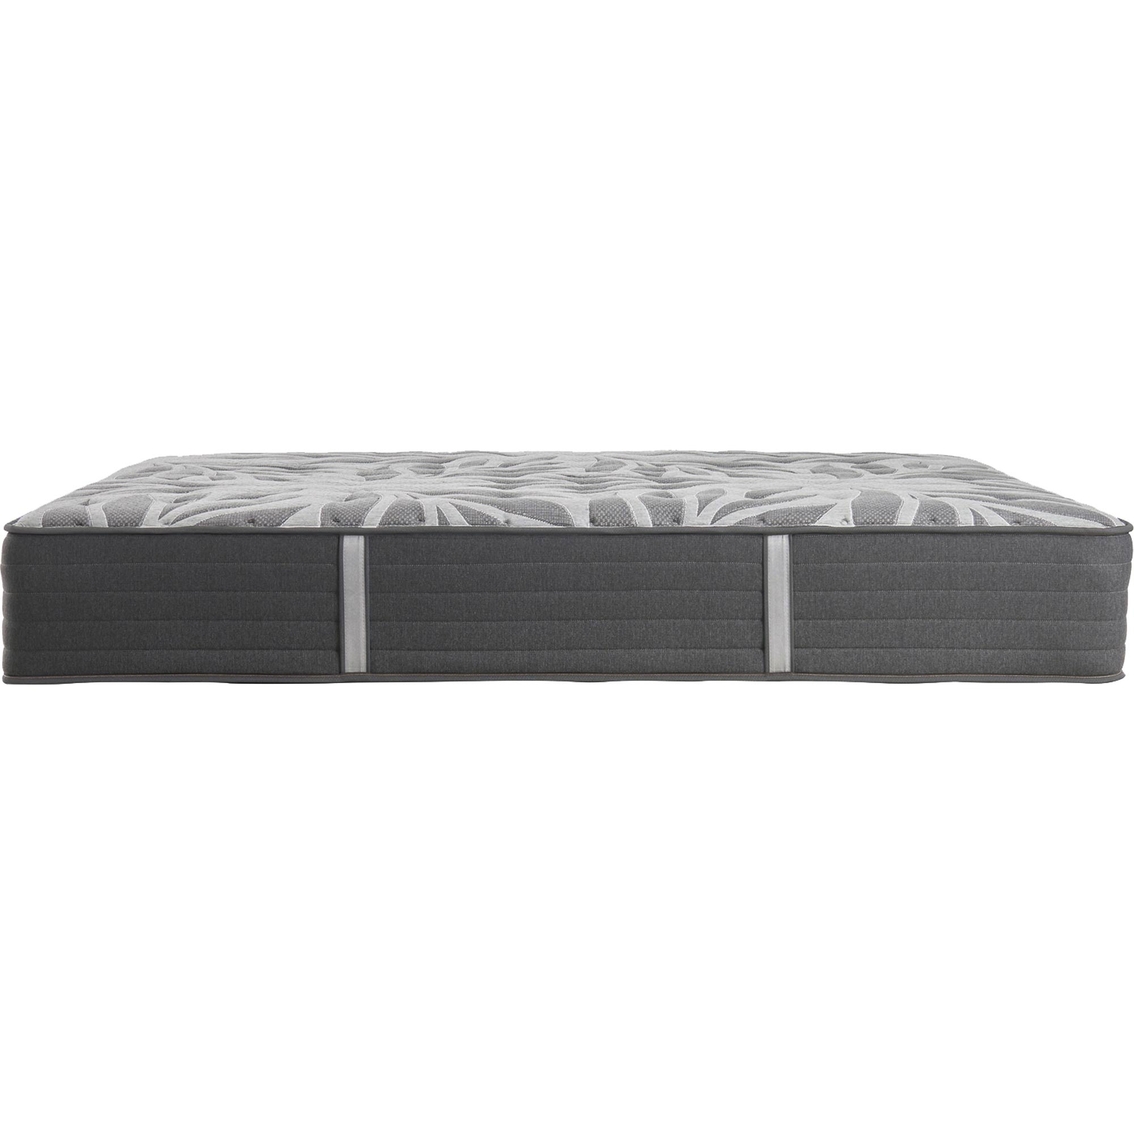 Sealy Opportune II Cushion Firm Mattress - Image 2 of 2